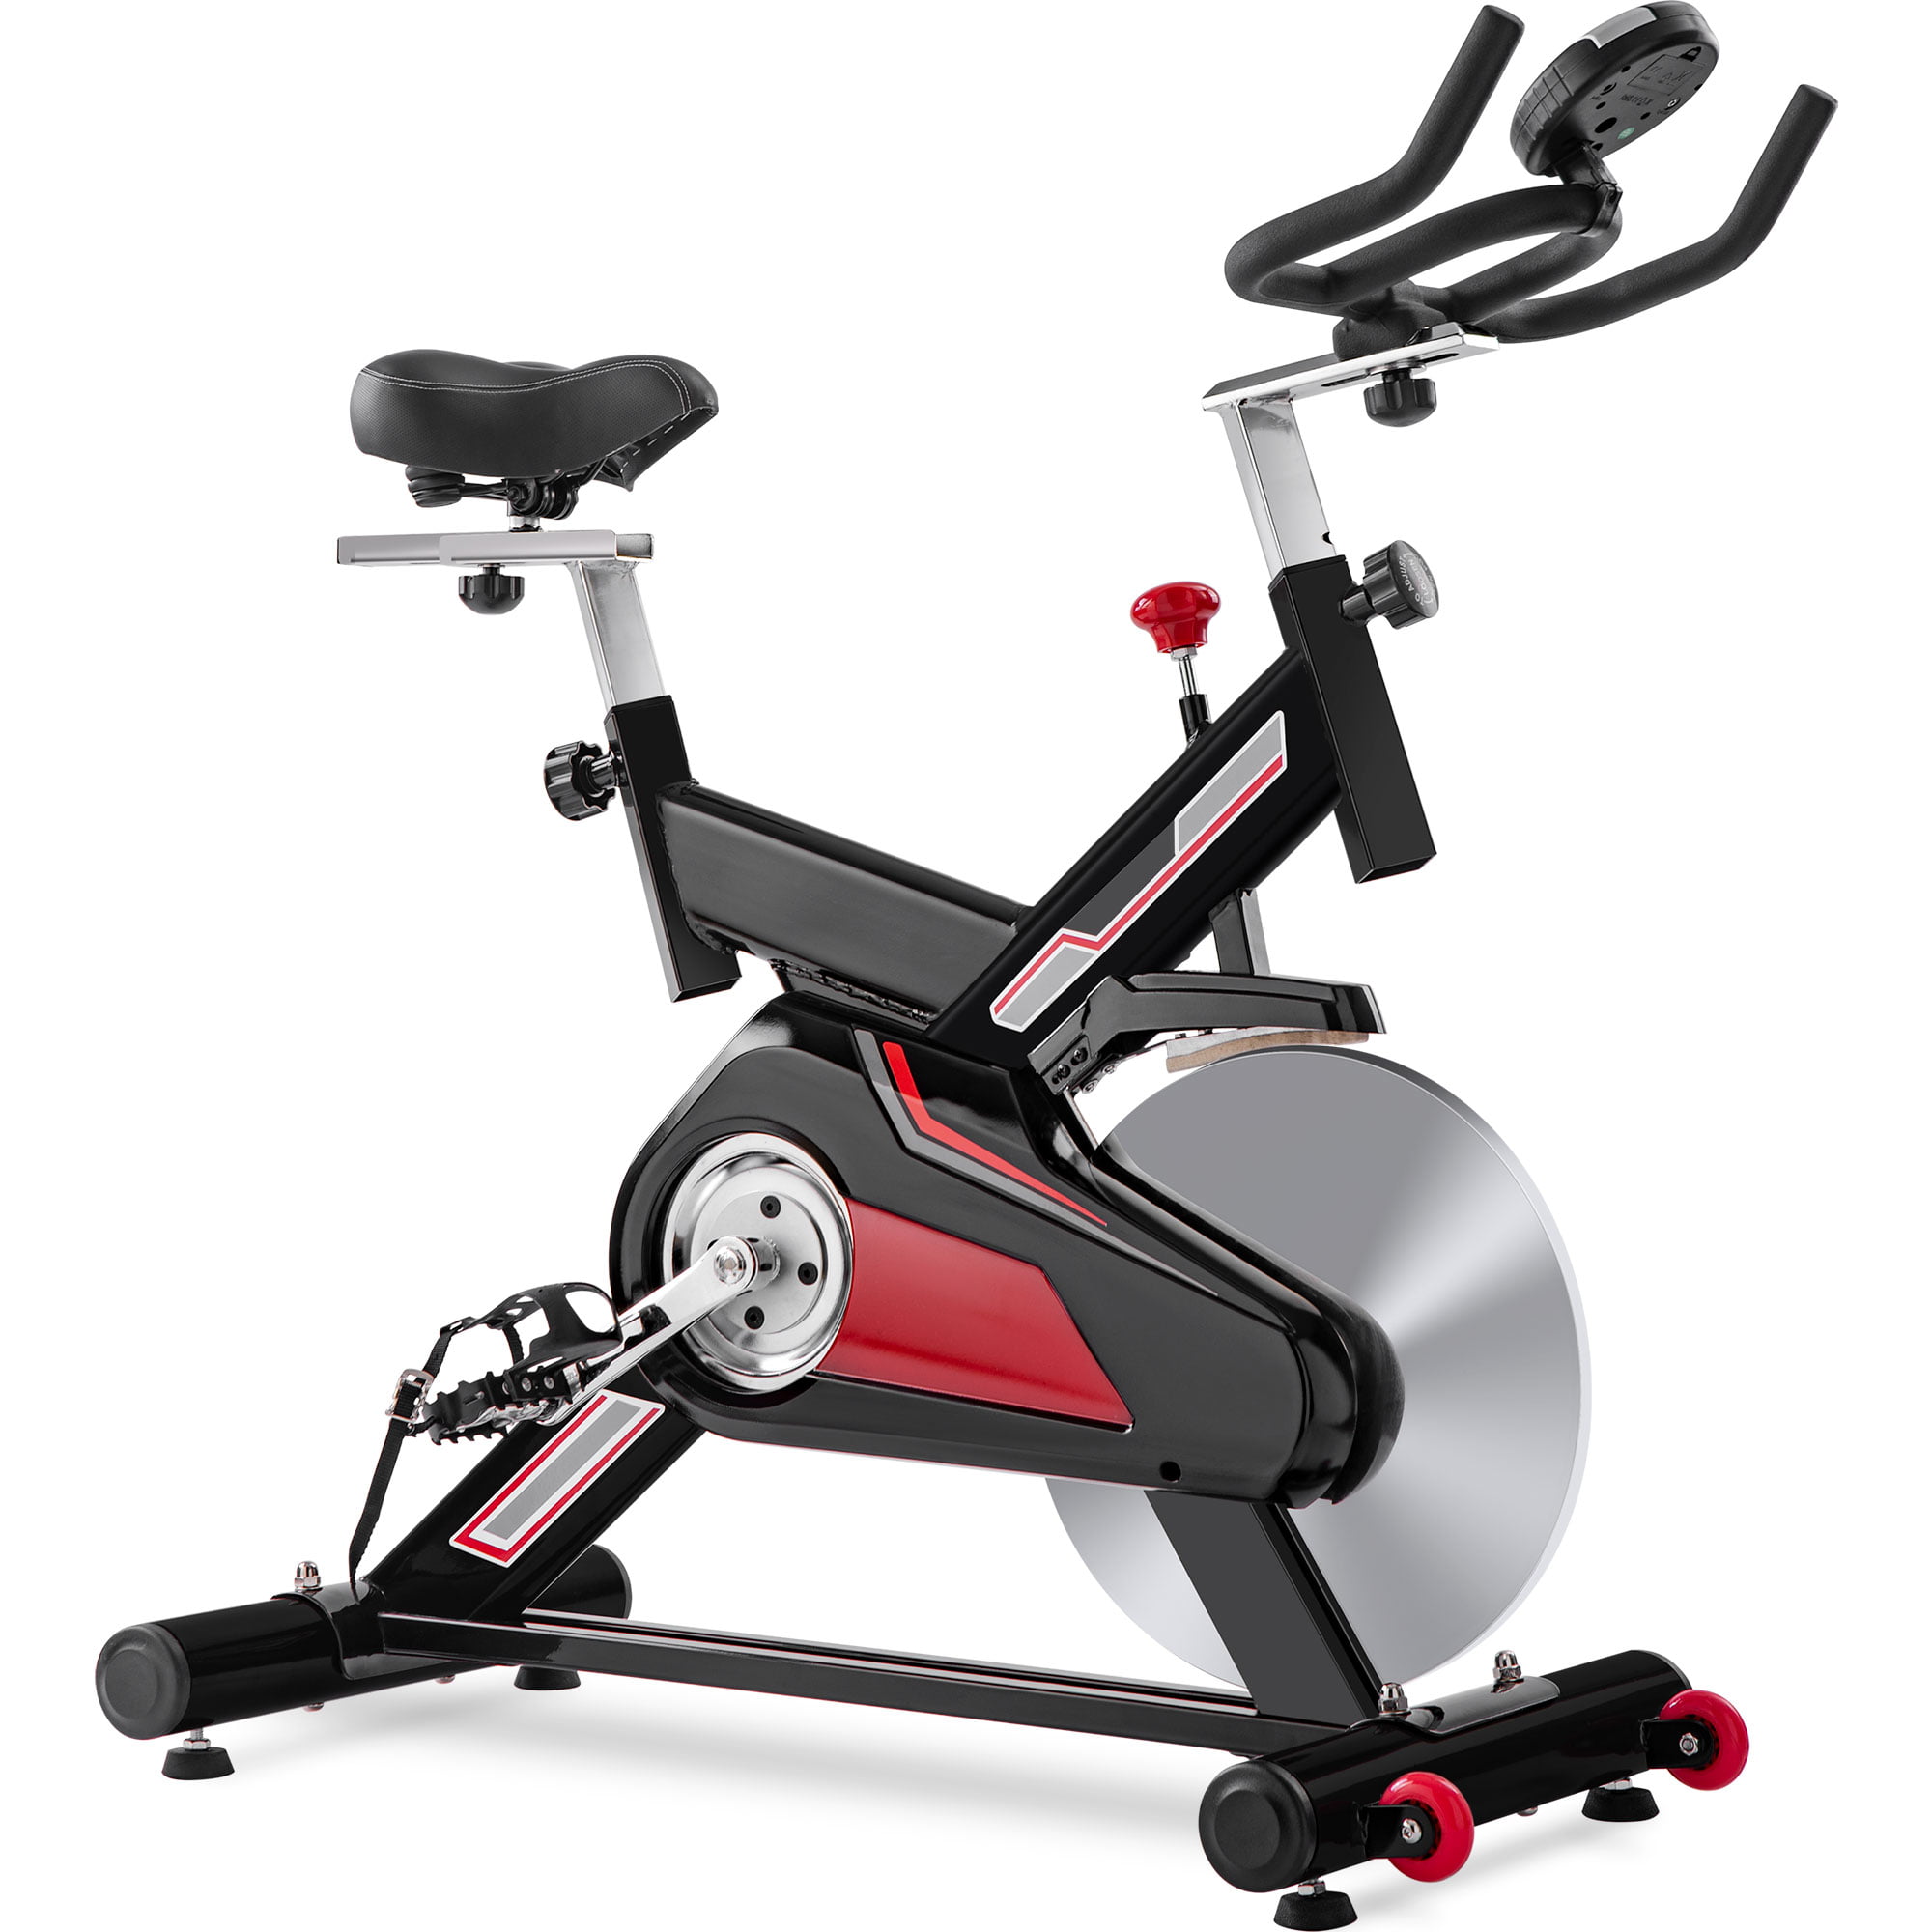 Details about   Indoor Exercise Bike Fitness Gym Cycling Stationary Bicycle LCD Cardio Workout 